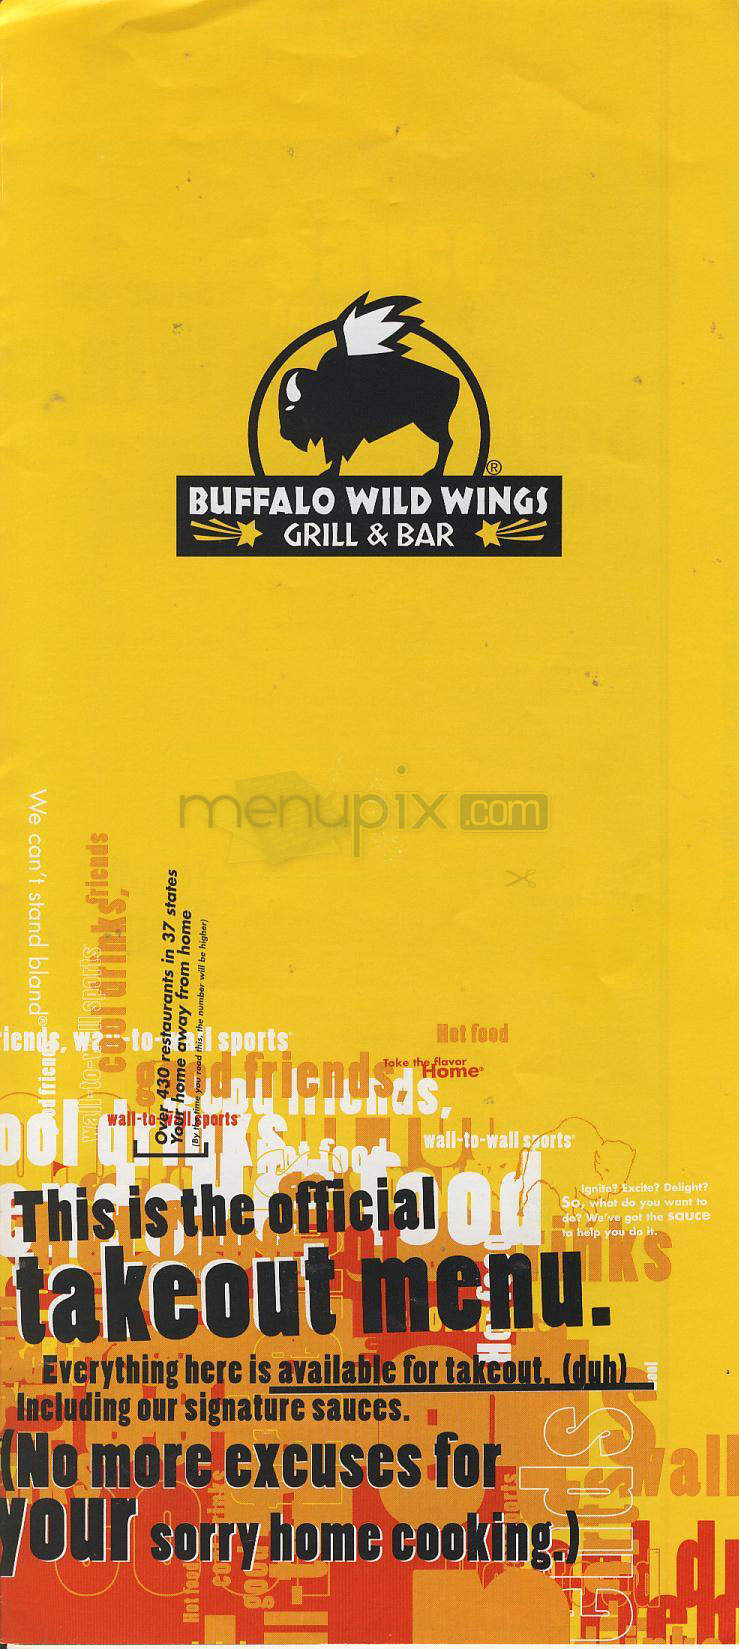 /380357395/Buffalo-Wild-Wings-Grill-and-Bar-Middletown-NY - Middletown, NY